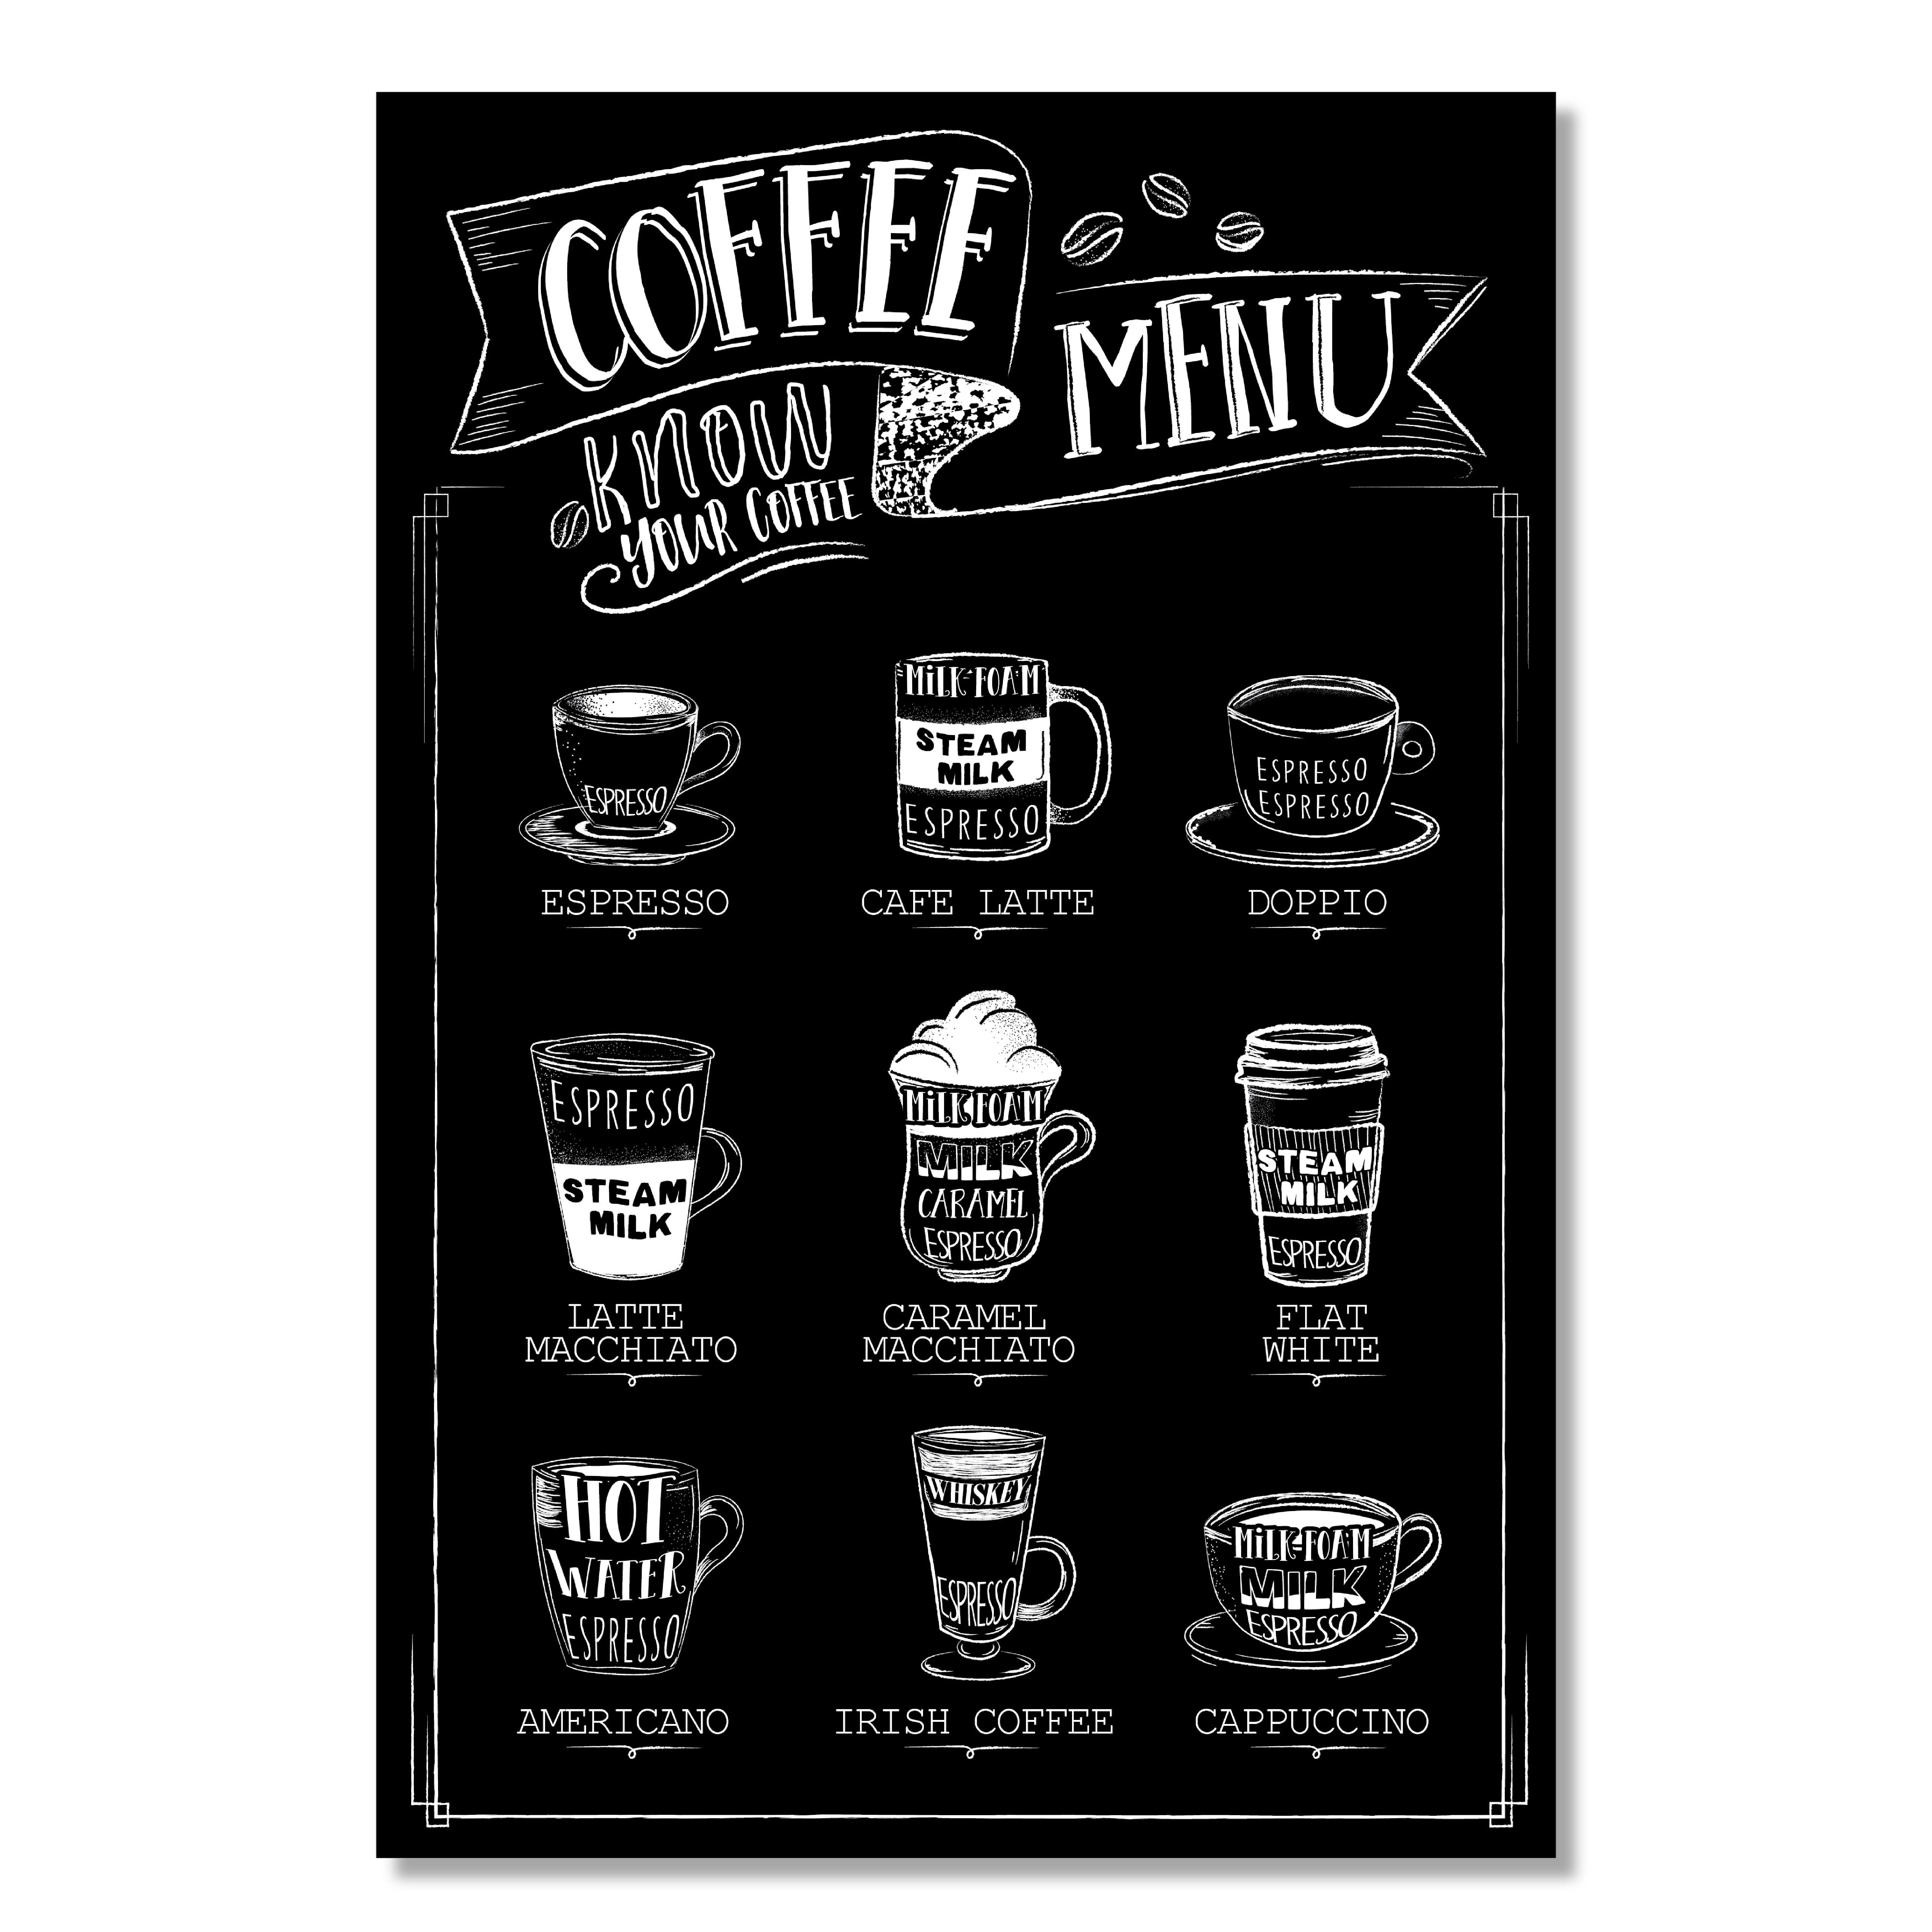 Donuts Coffee Shop Neon LED light Sign Cafe Bar decor size 12 x 8 in